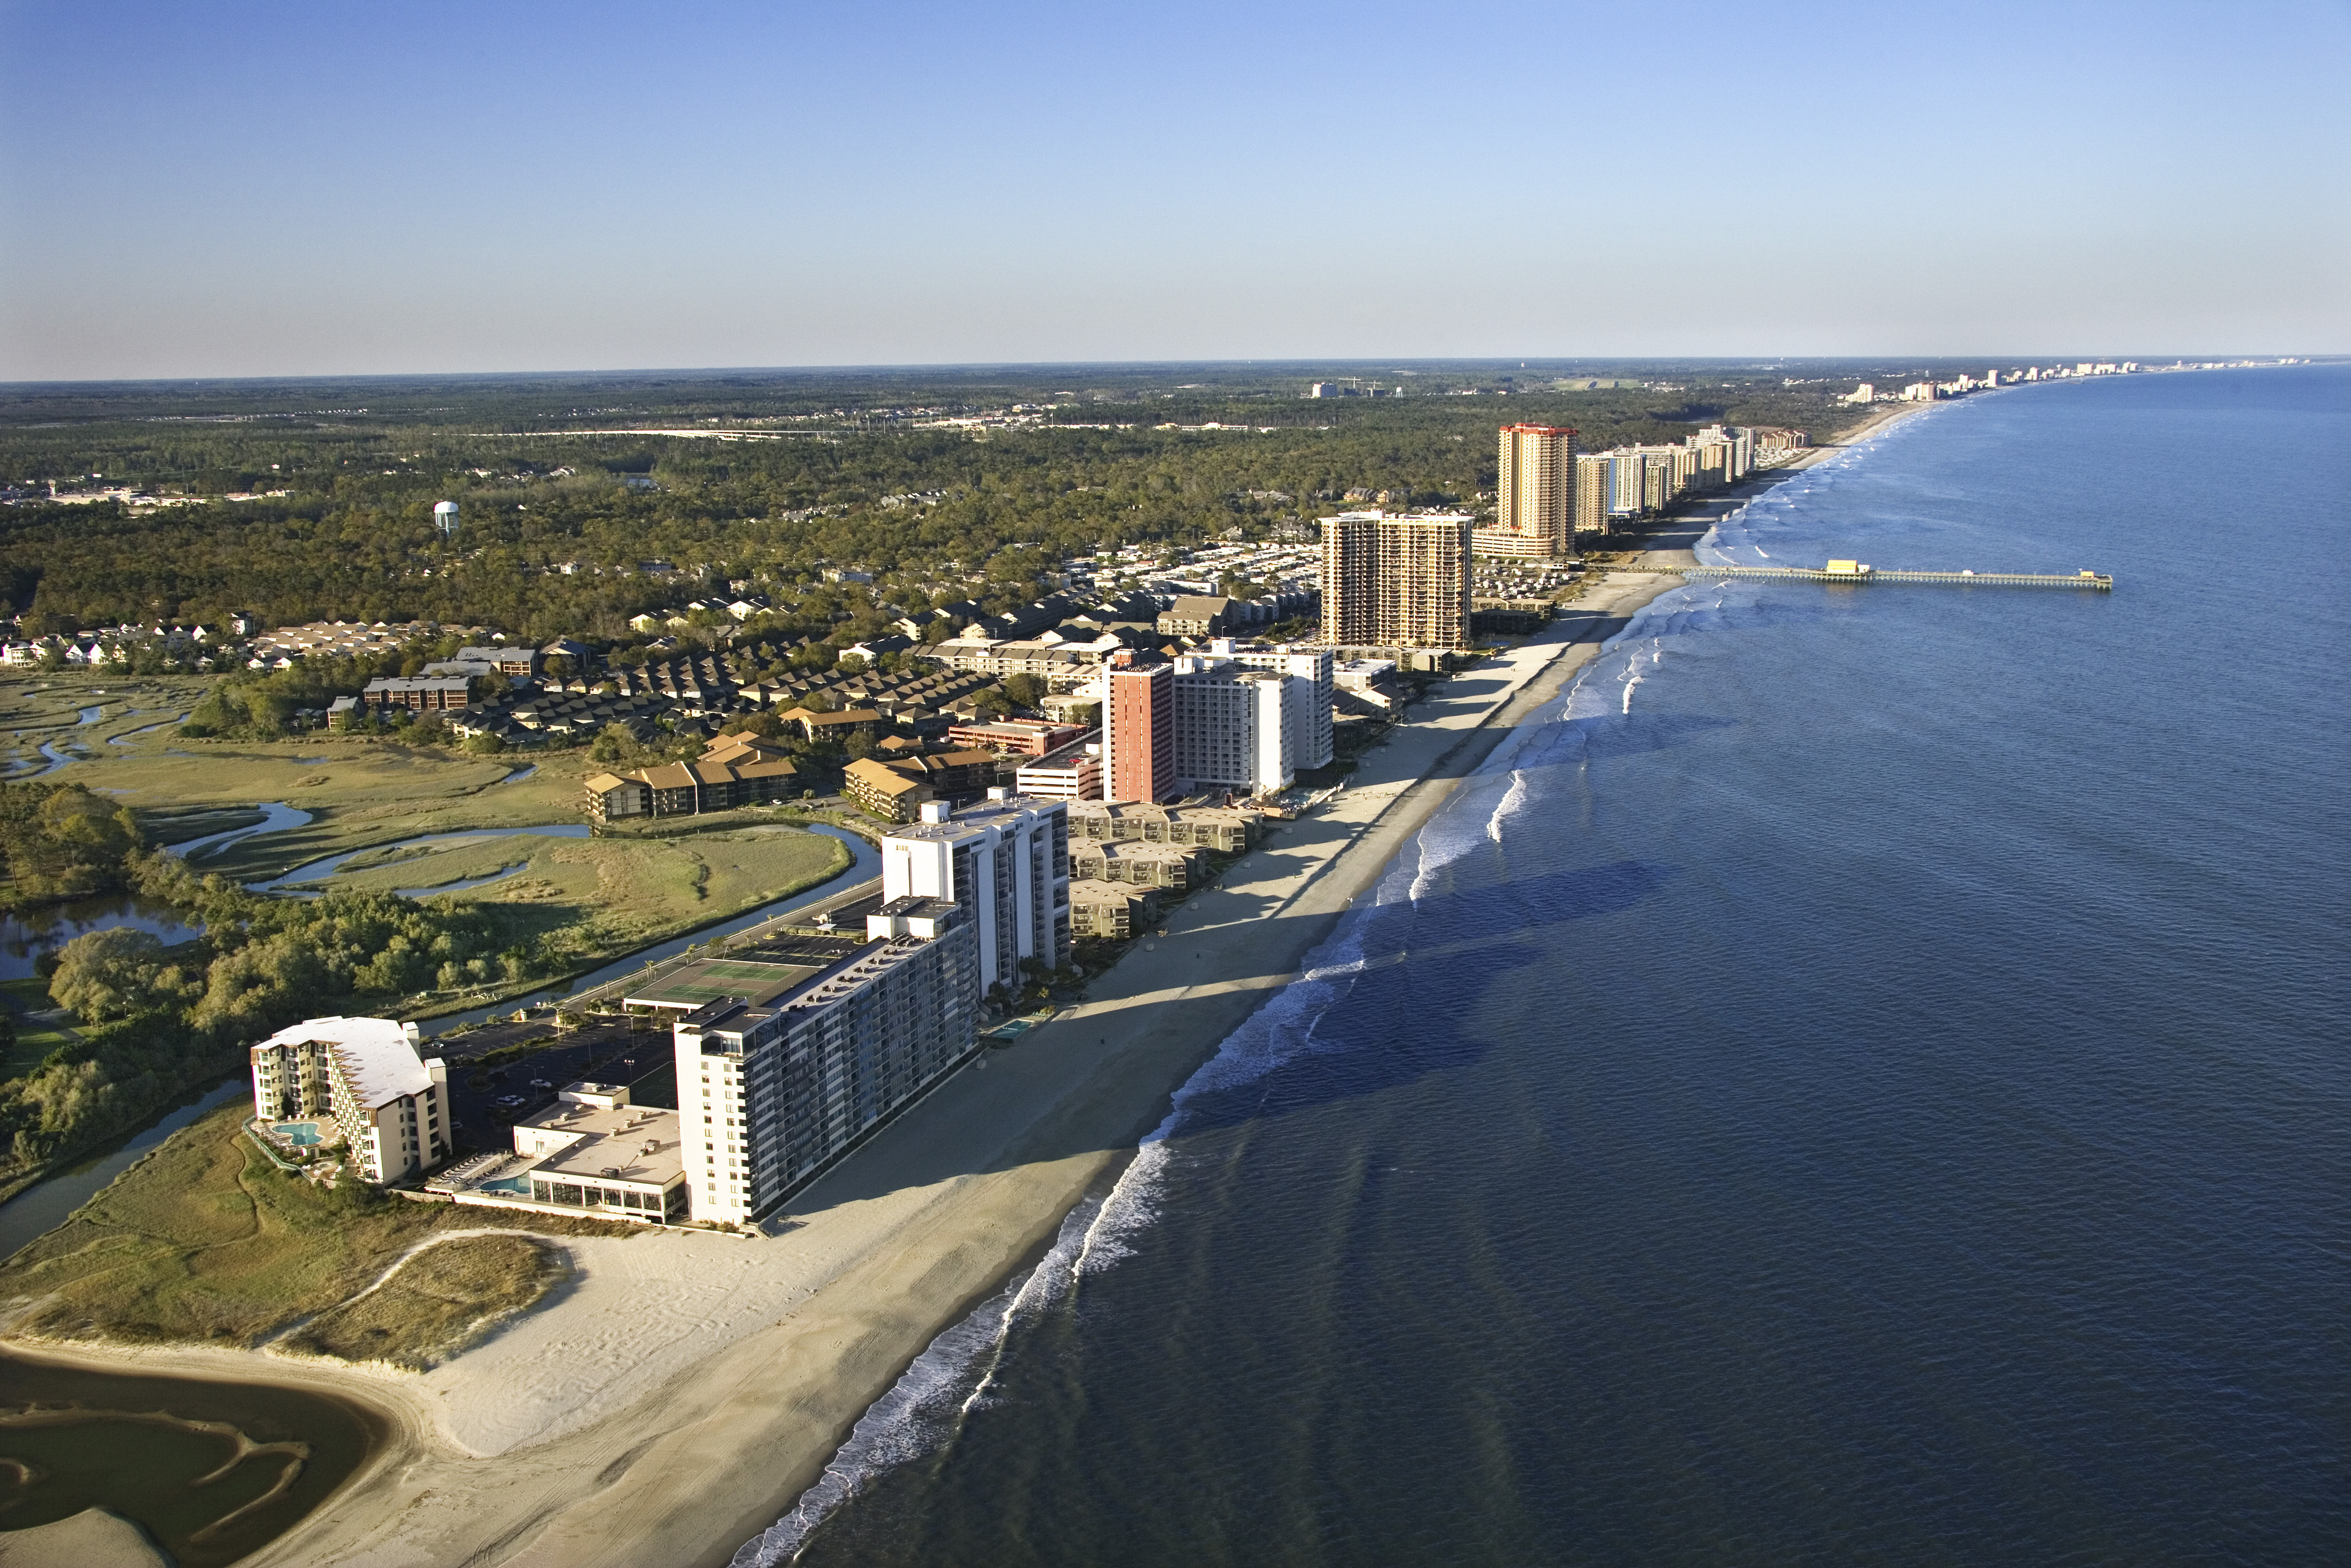 Aerial view of Myrtle Beach, South Carolina